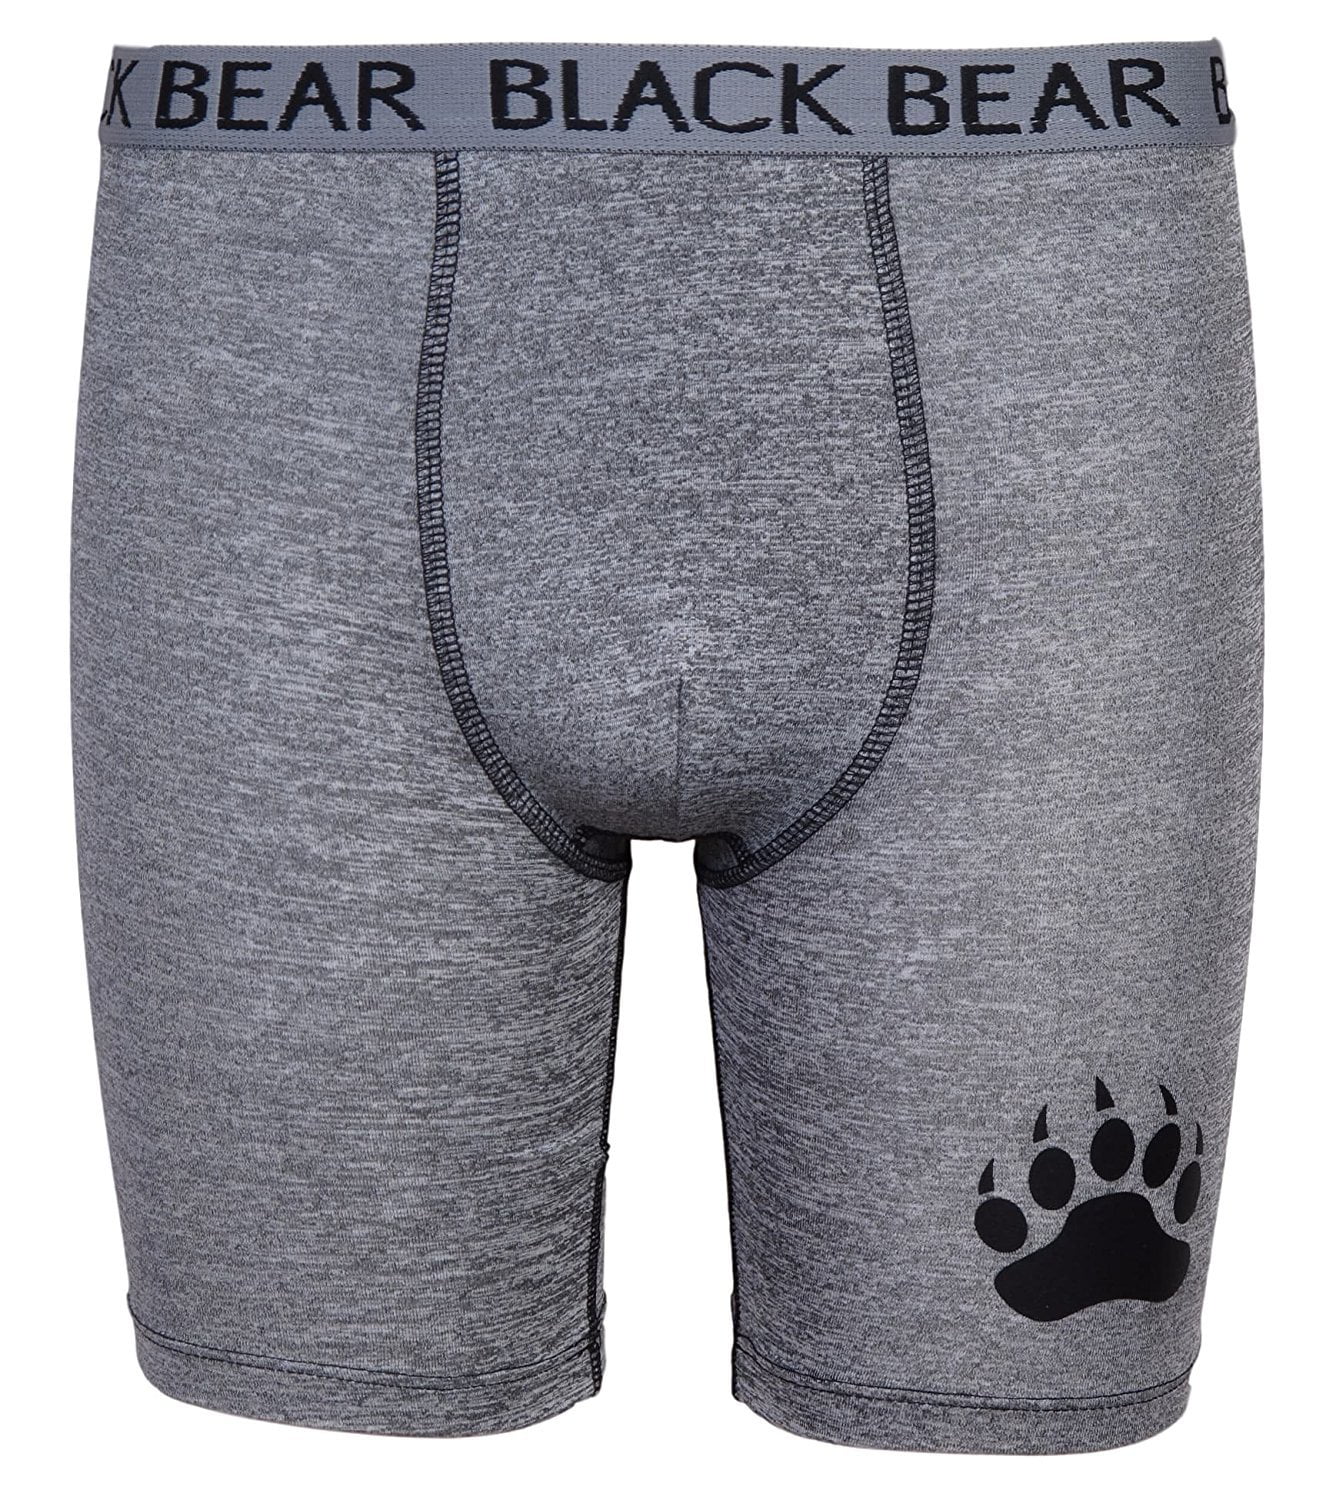 4 Pack Black Bear Boys’ Performance Dry-Fit Compression Boxer Brief 